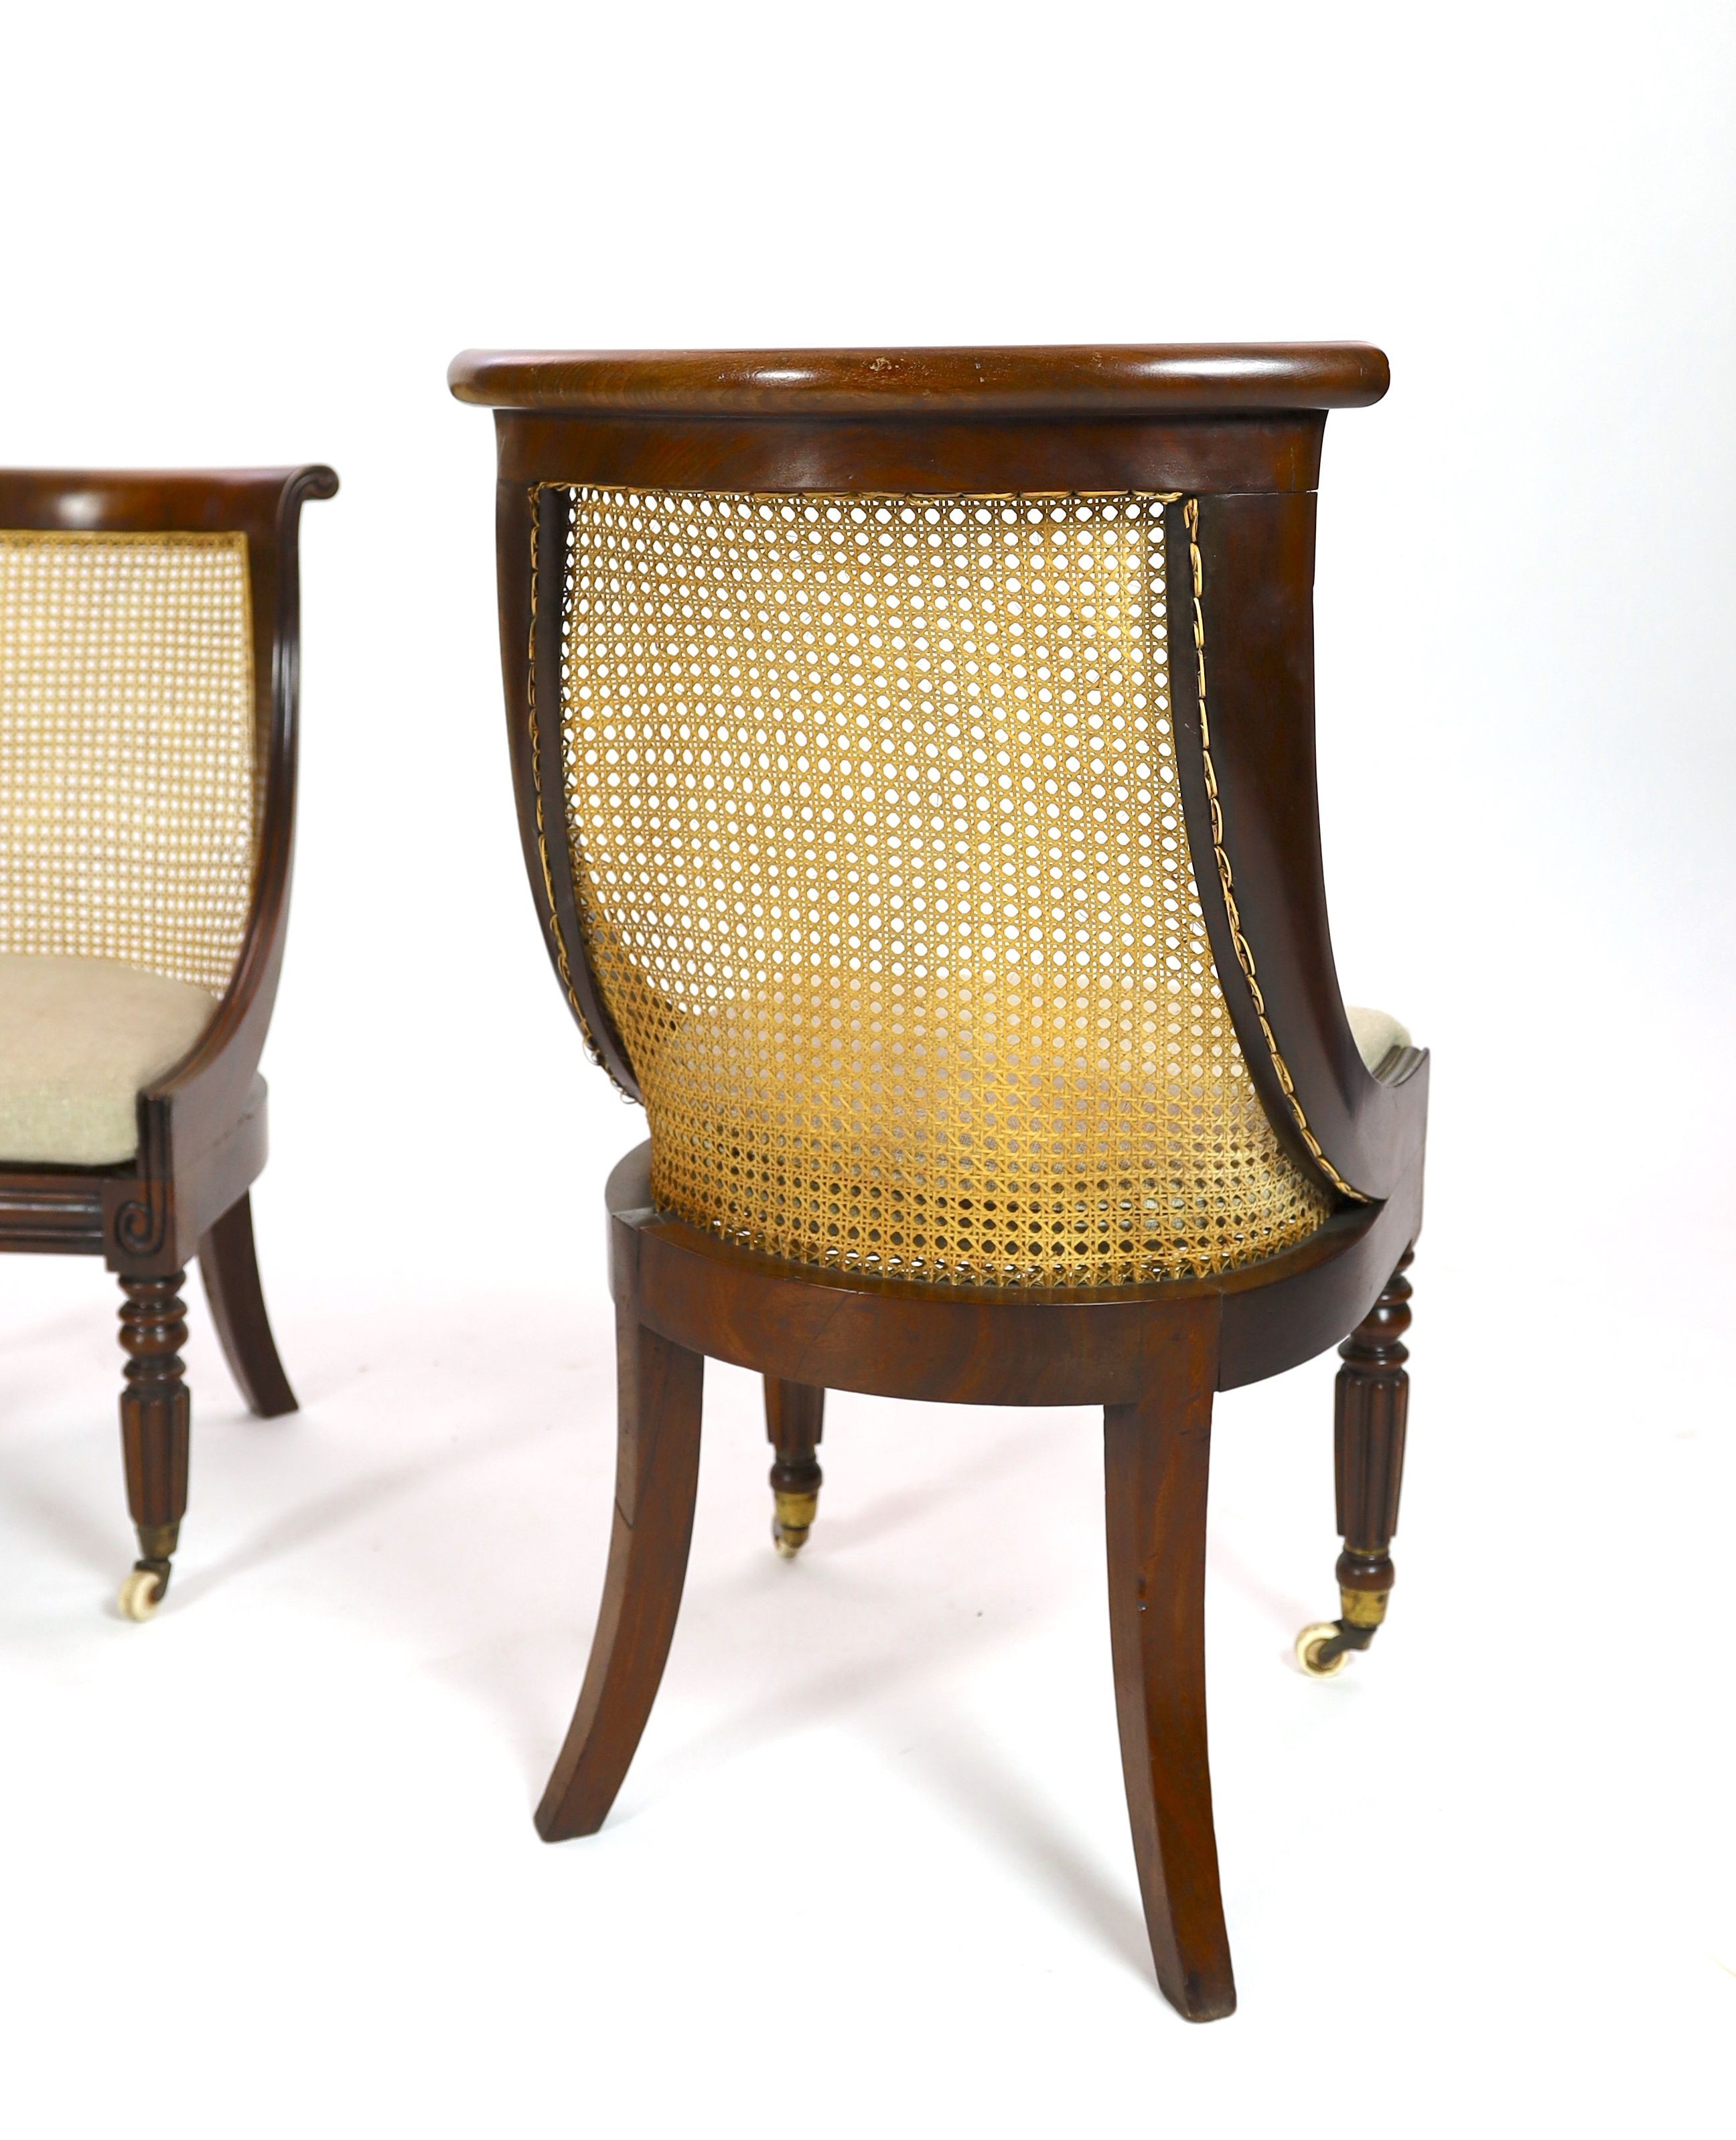 A pair of late Regency mahogany bergere side chairs